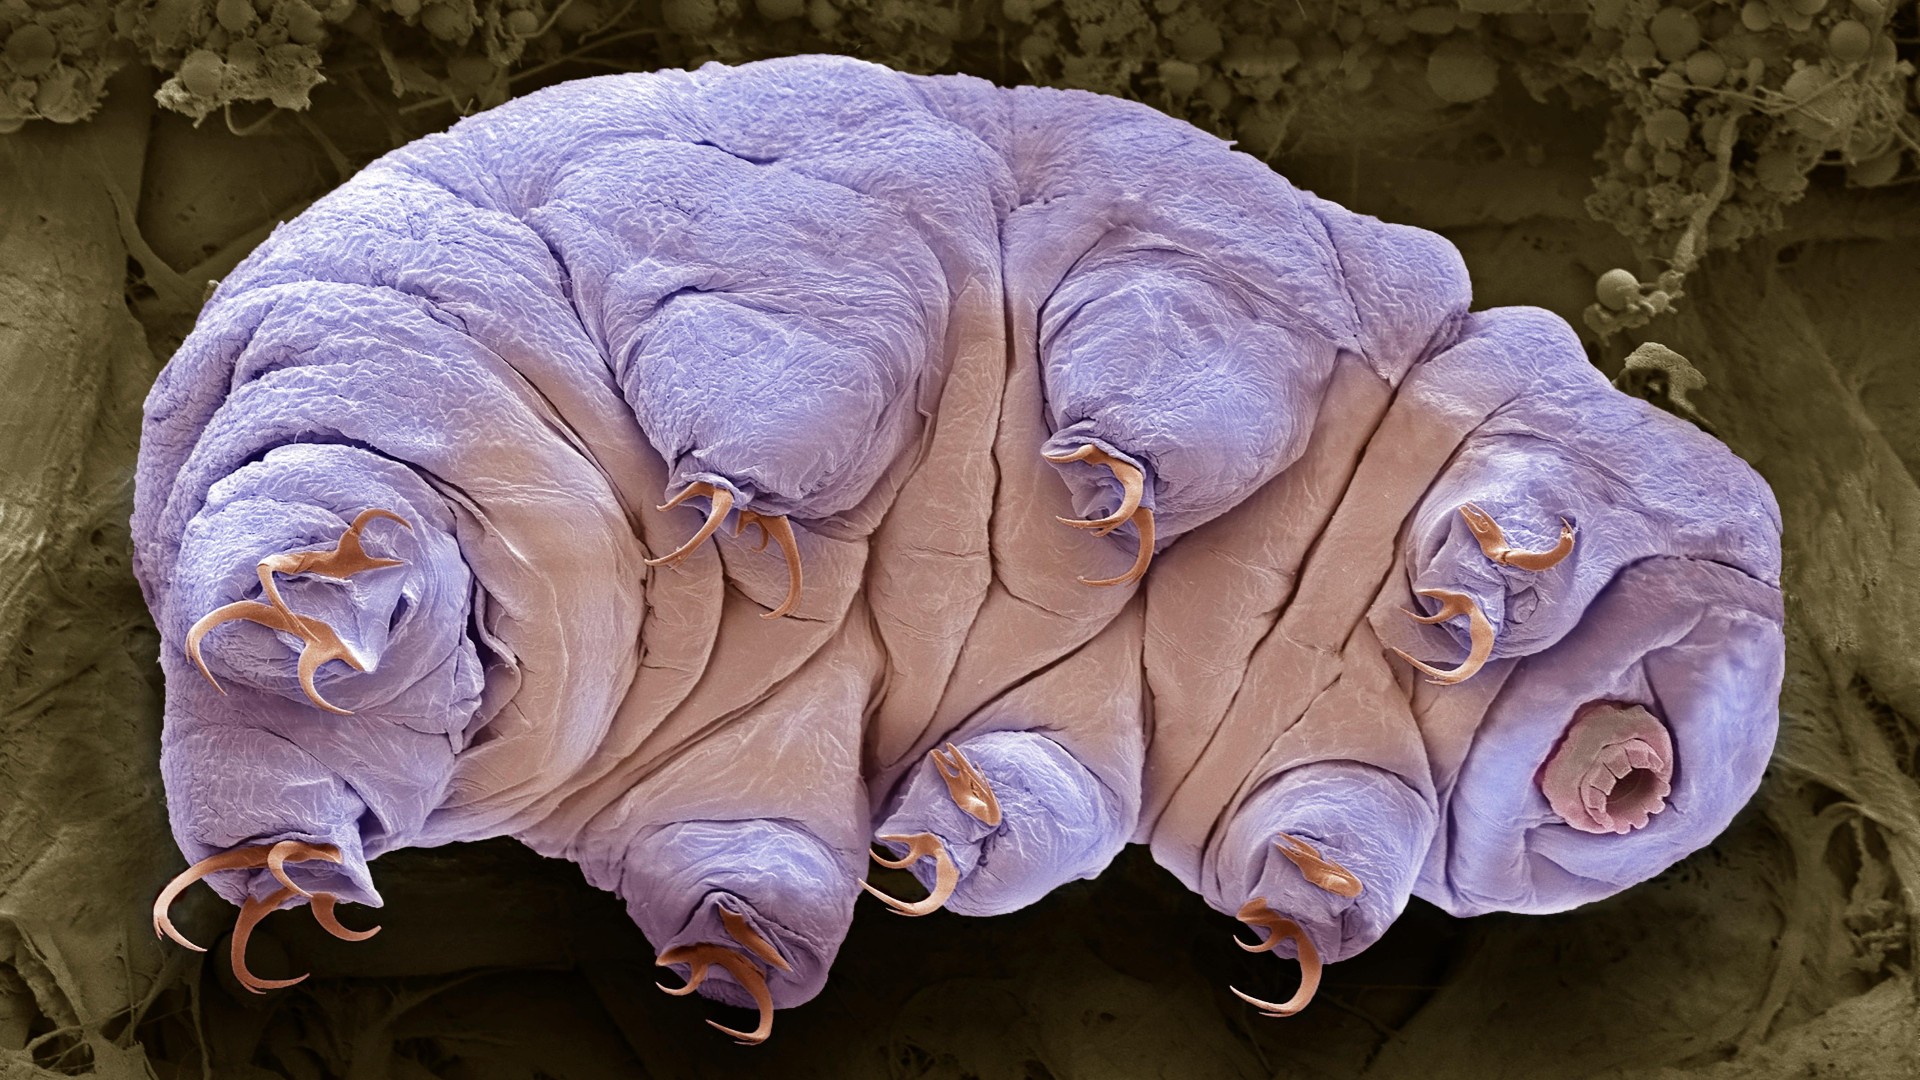 Coloured scanning electron micrograph (SEM) of a water bear, or tardigrade (phylum Tardigrada). Water bears are small, water-dwelling, segmented micro-animals with eight legs that live in damp habitats such as moss or lichen.